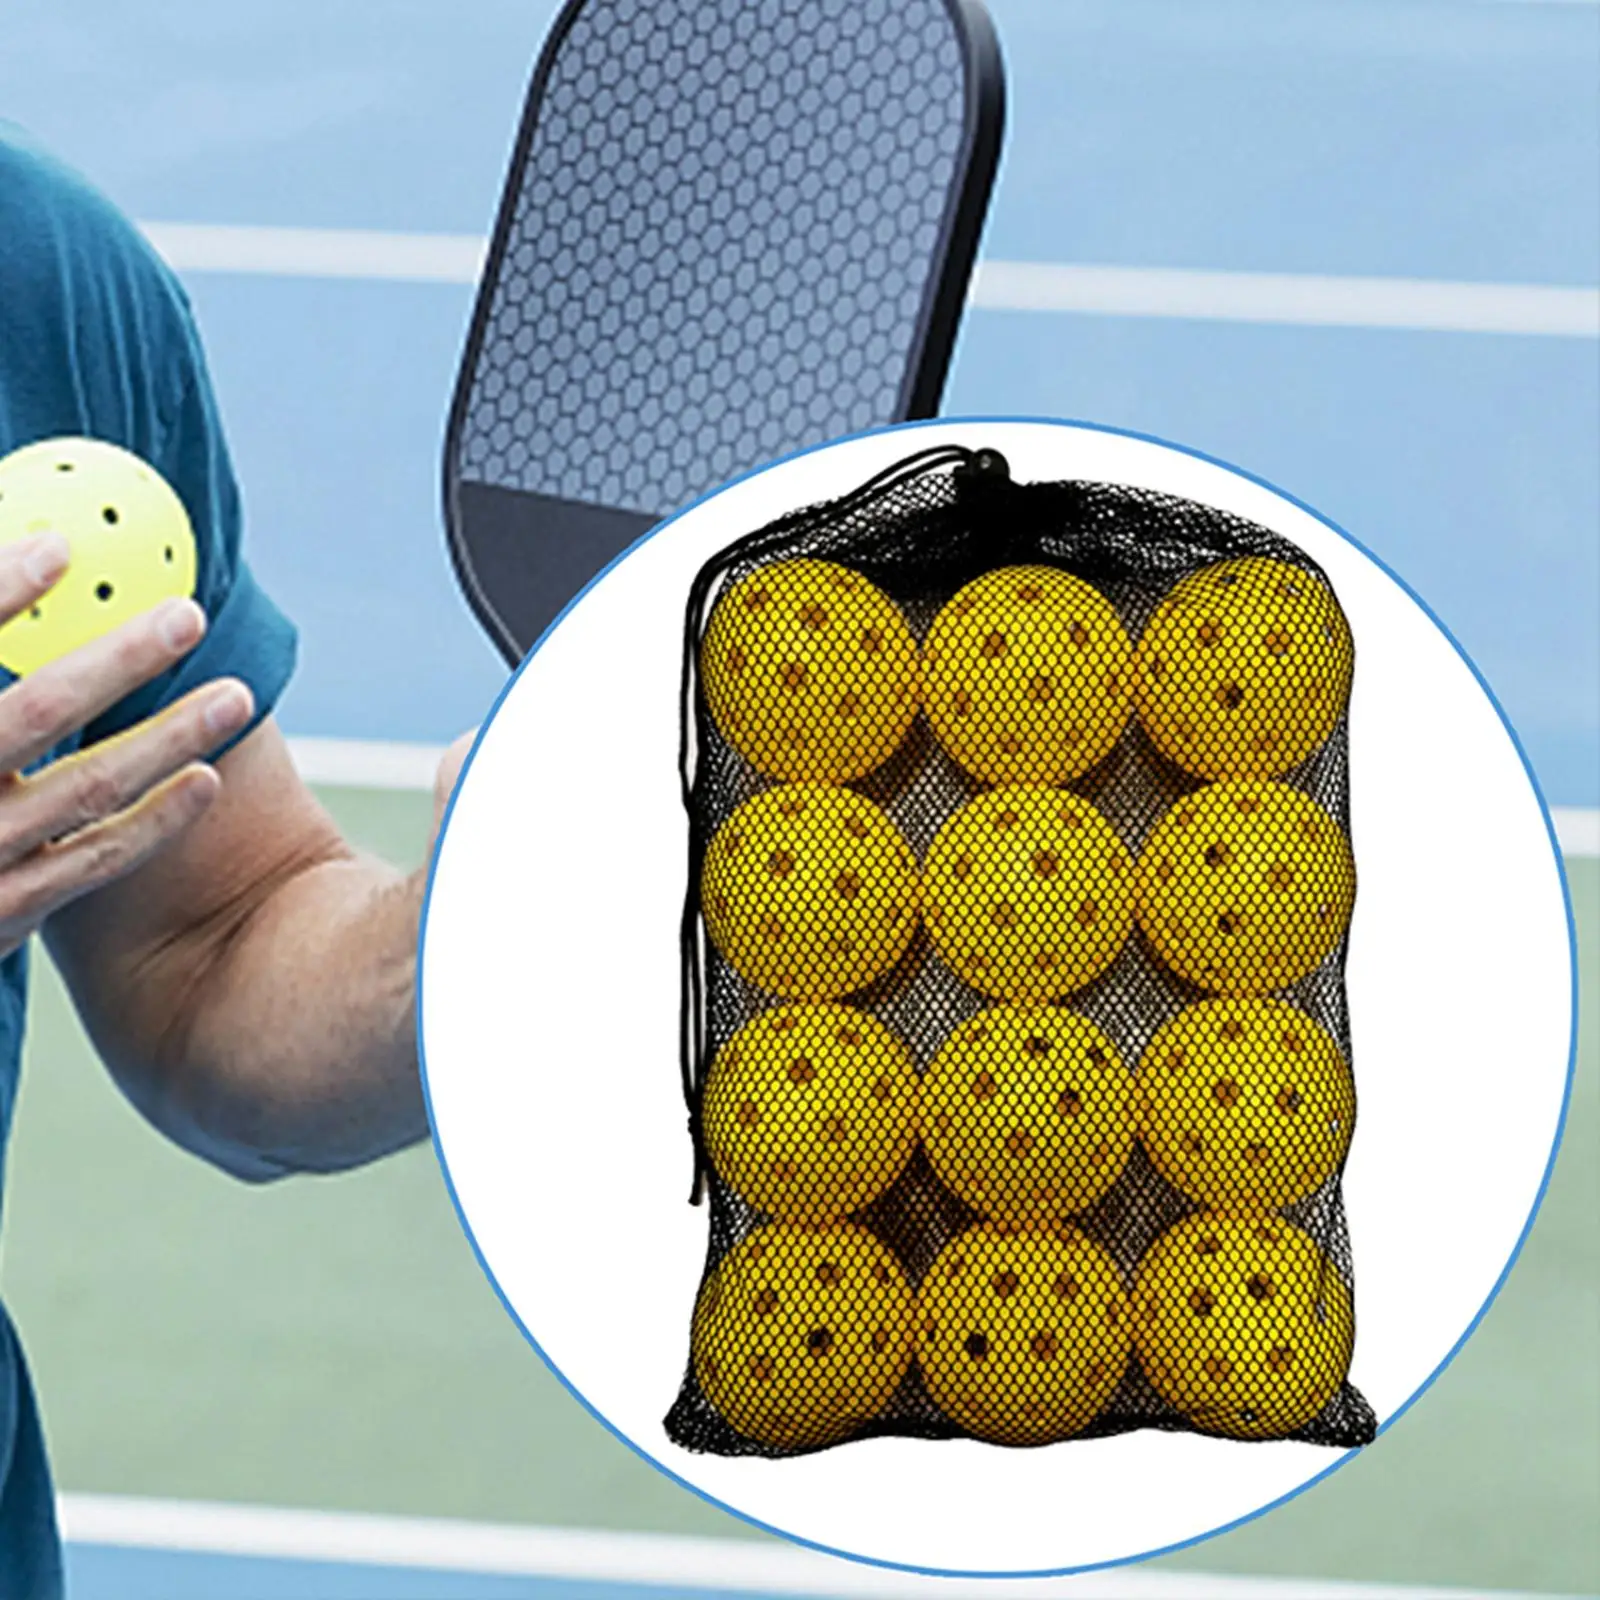 12x Pickleball Balls 40 Holes 74mm Professional Specifically Designed Accessories for Indoor Outdoor Sanctioned Tournament Play